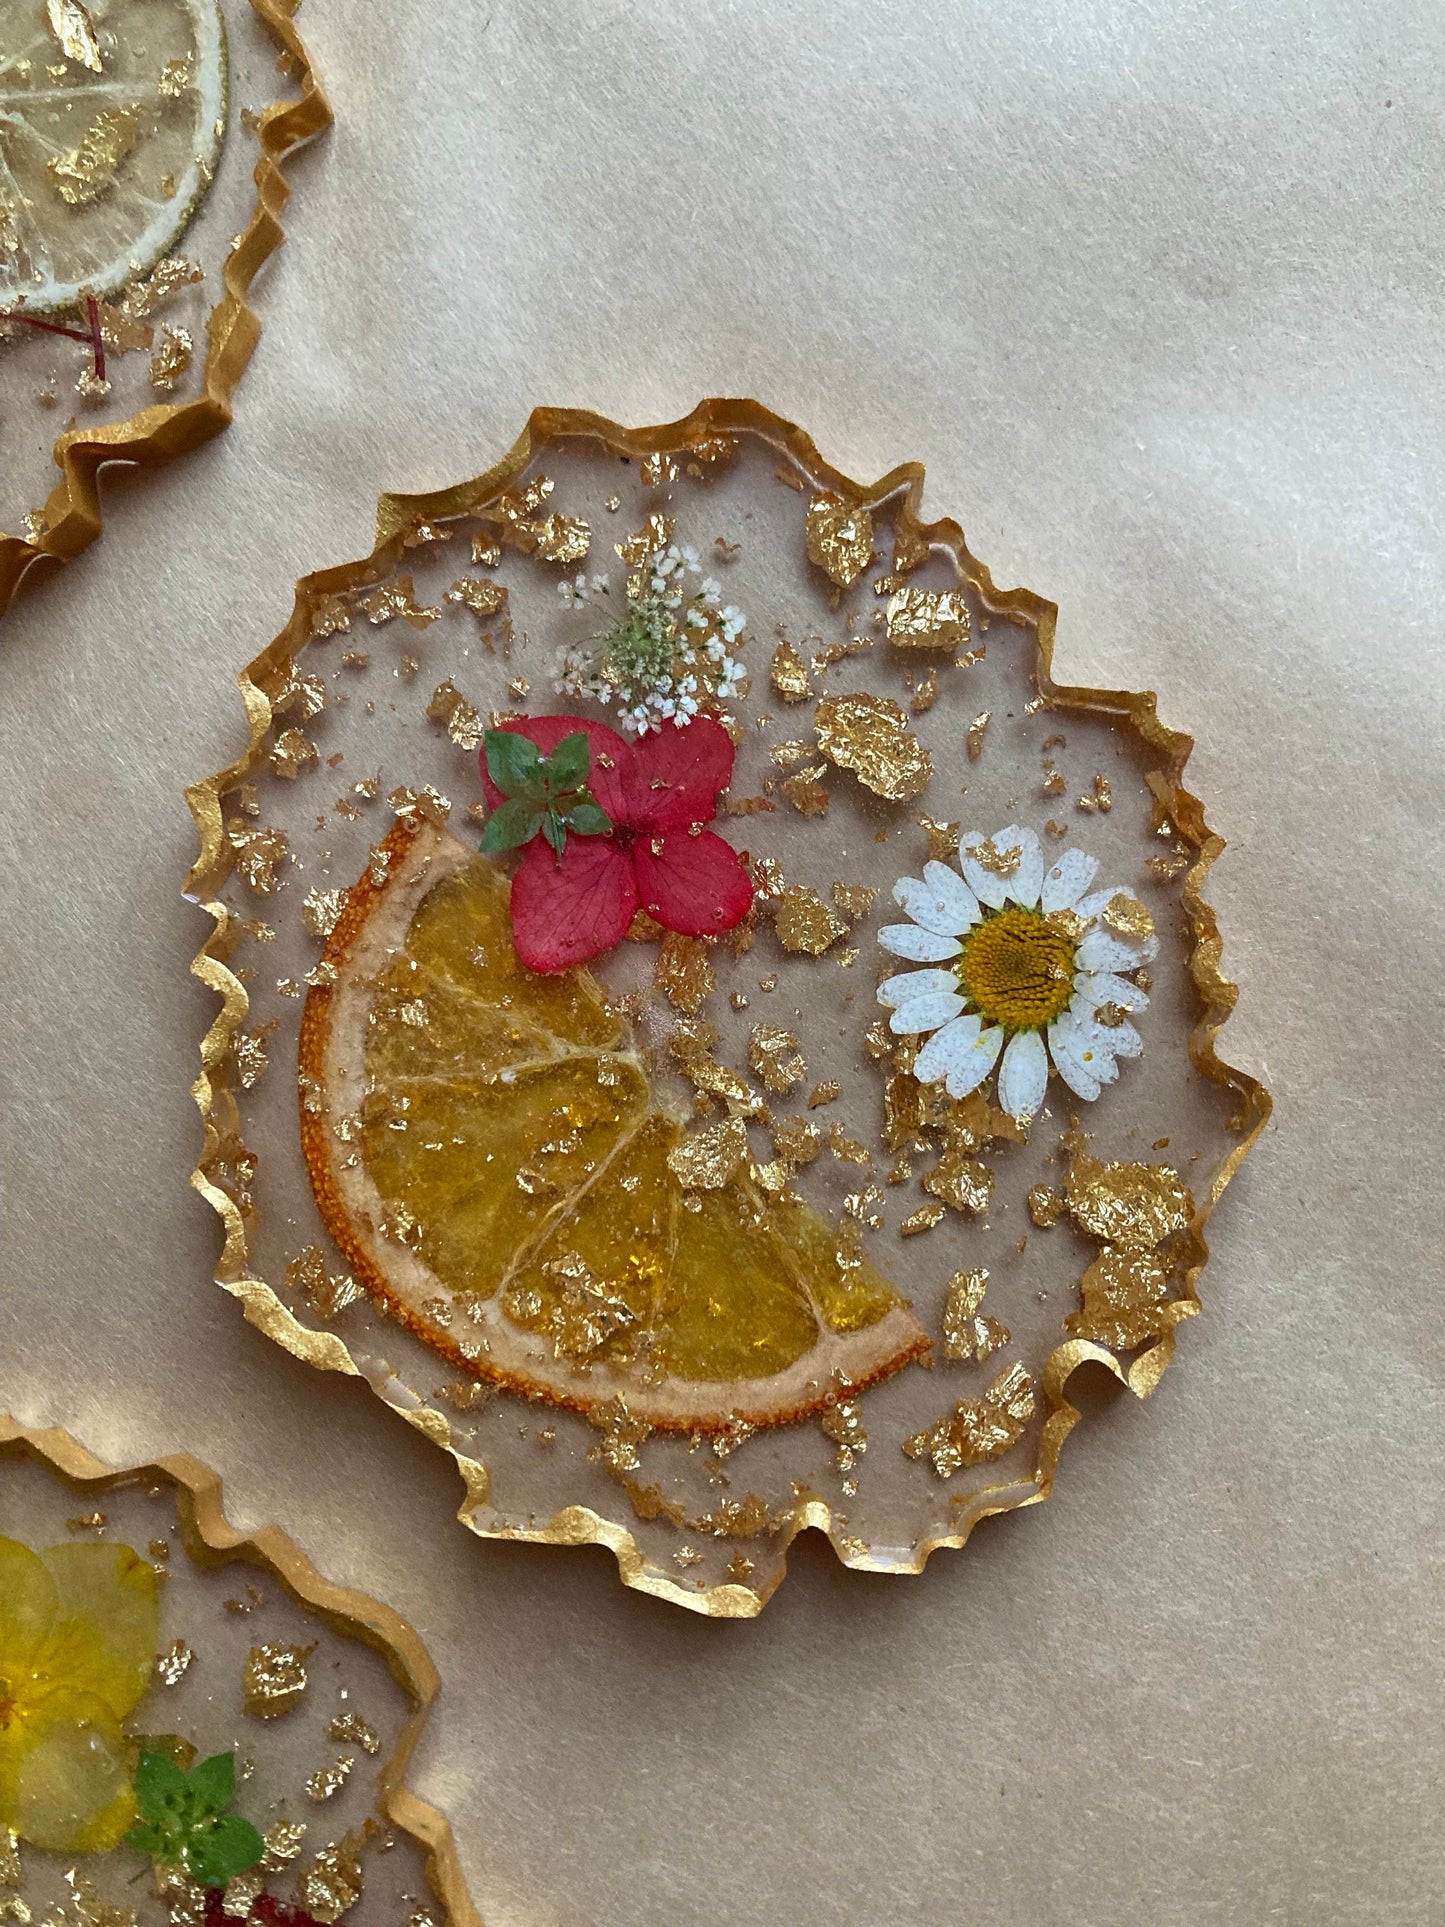 Set of 4 boho pressed flower and fruit gold leaf coaster set ~ gold natural edge ~ resin ~ customizable ~ 4th anniversary gift